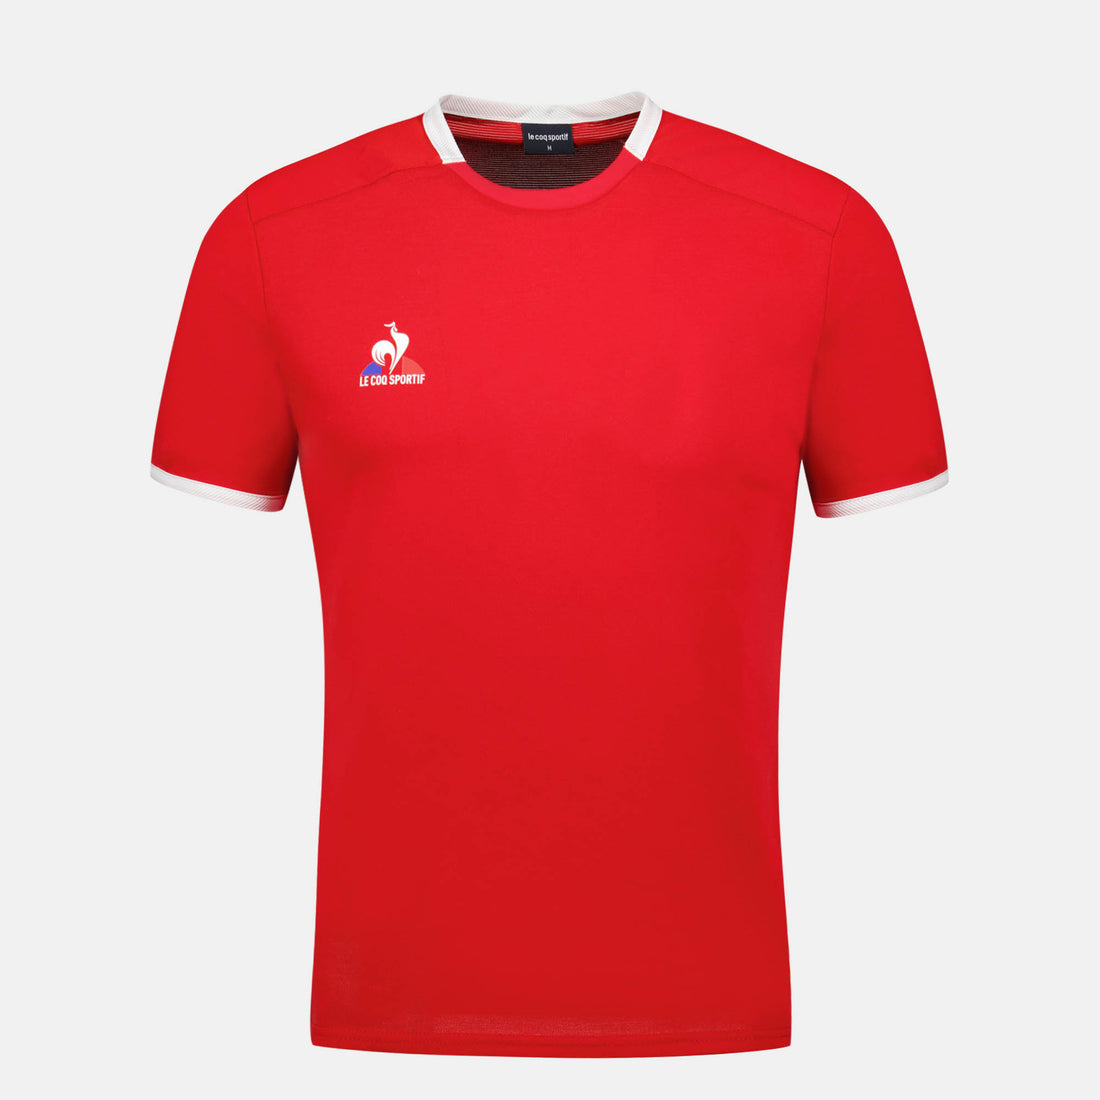 2320139-TENNIS Tee SS N°5 M pur rouge/new optica | T-shirt Homme